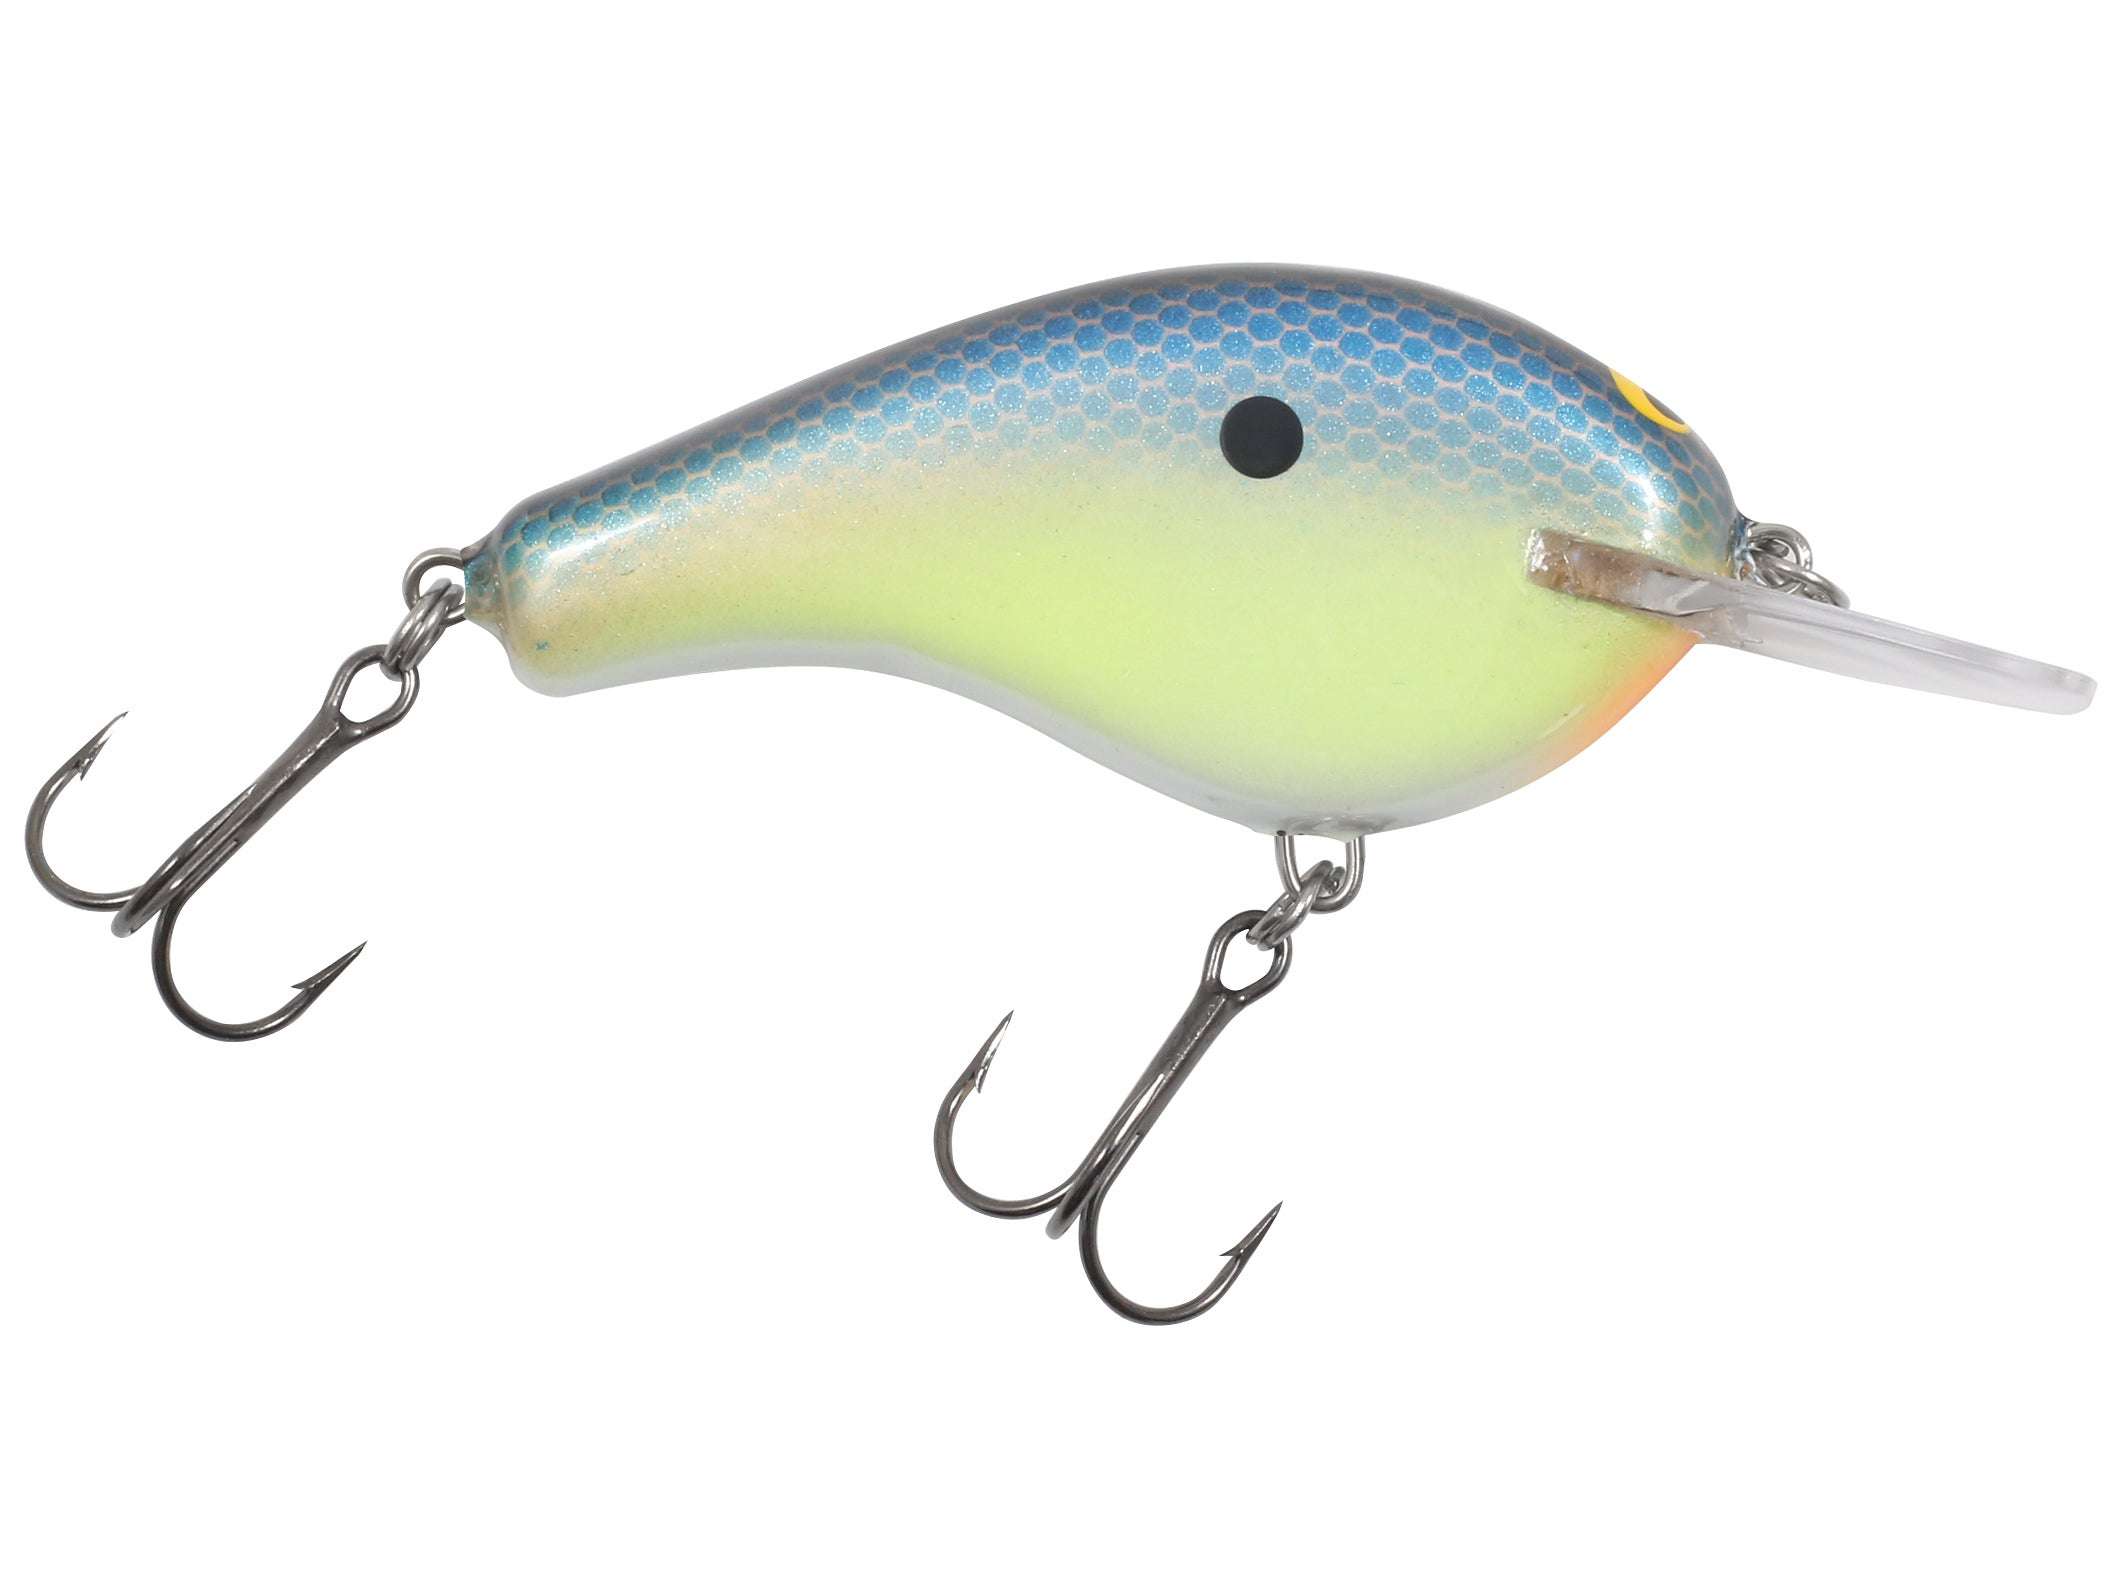 <p><strong>Bagley Flat Balsa B Squarebill Crankbait</strong><br> Bagley has been a huge name in the balsa game for a very long time. The Bagley Flat Balsa B fits the bill for fall time cranking with its flat sides, square lip and tight wobble. <a href=